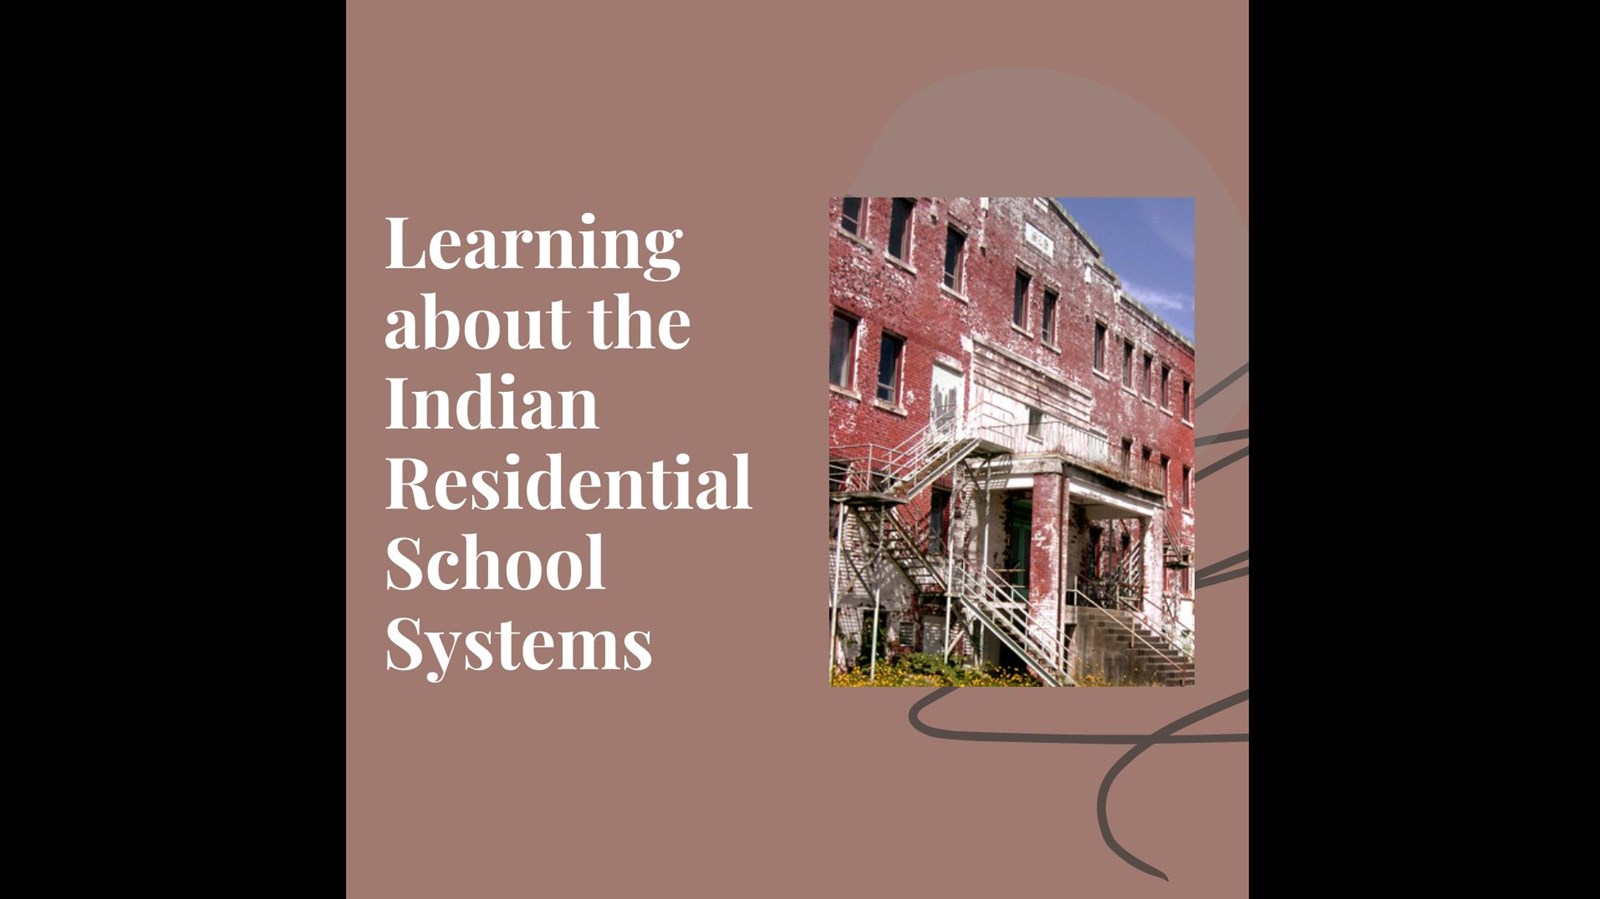 Residential School Systems